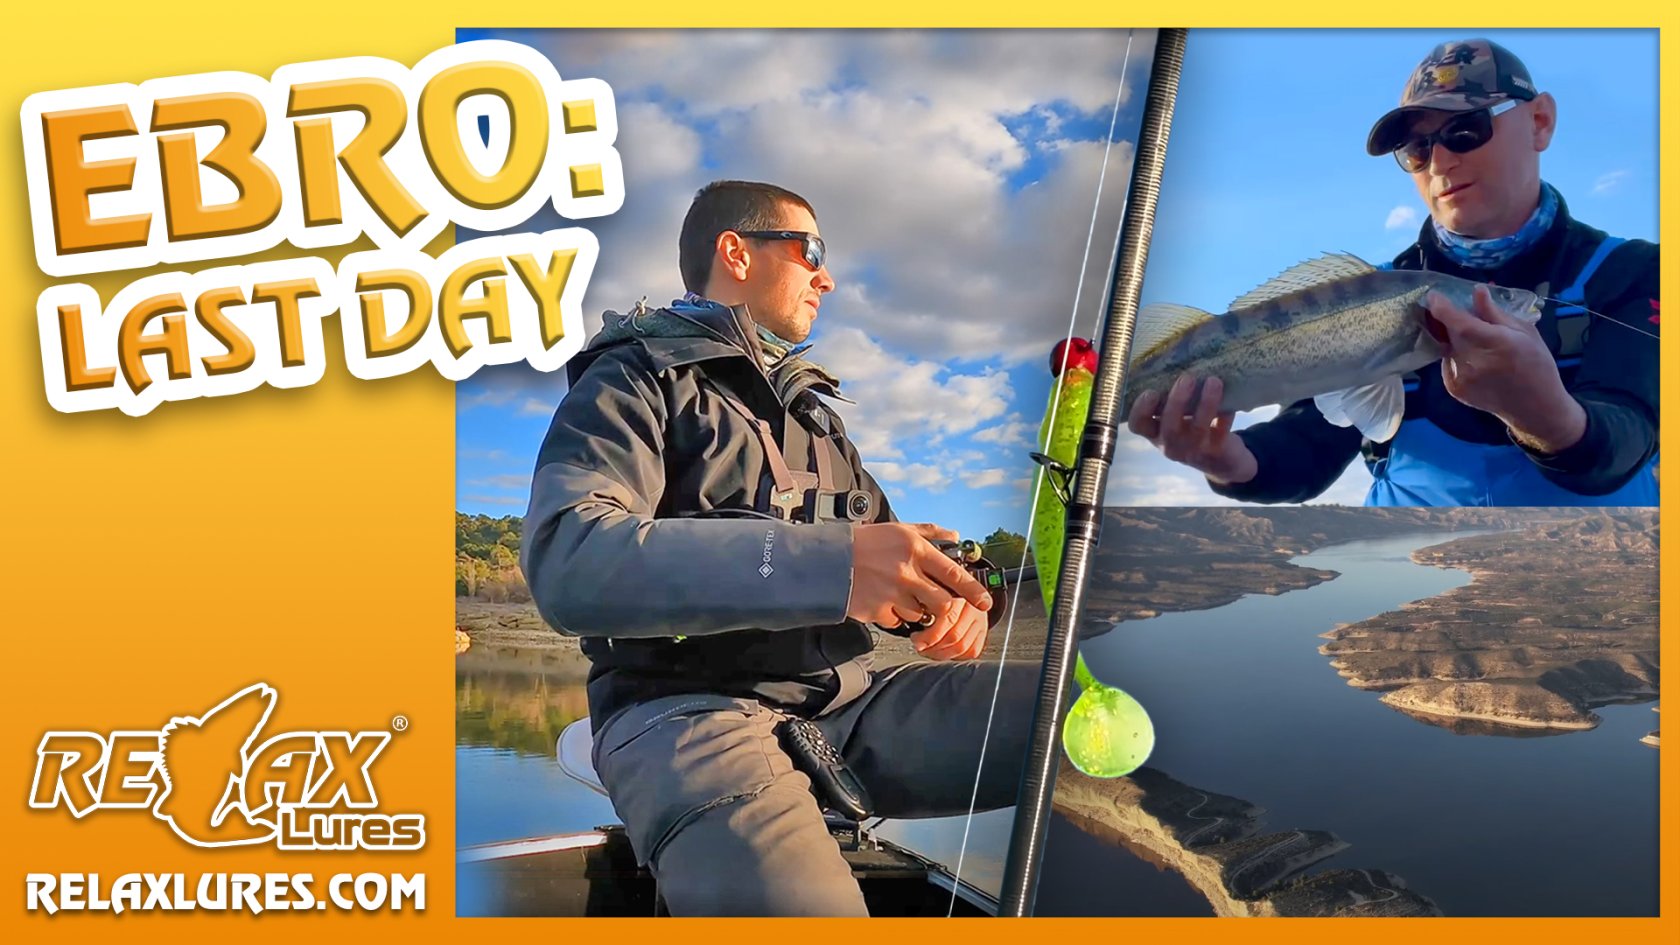 WILL WE CATCH ANYTHING? - EBRO: OUR LAST DAY - RELAX LURES